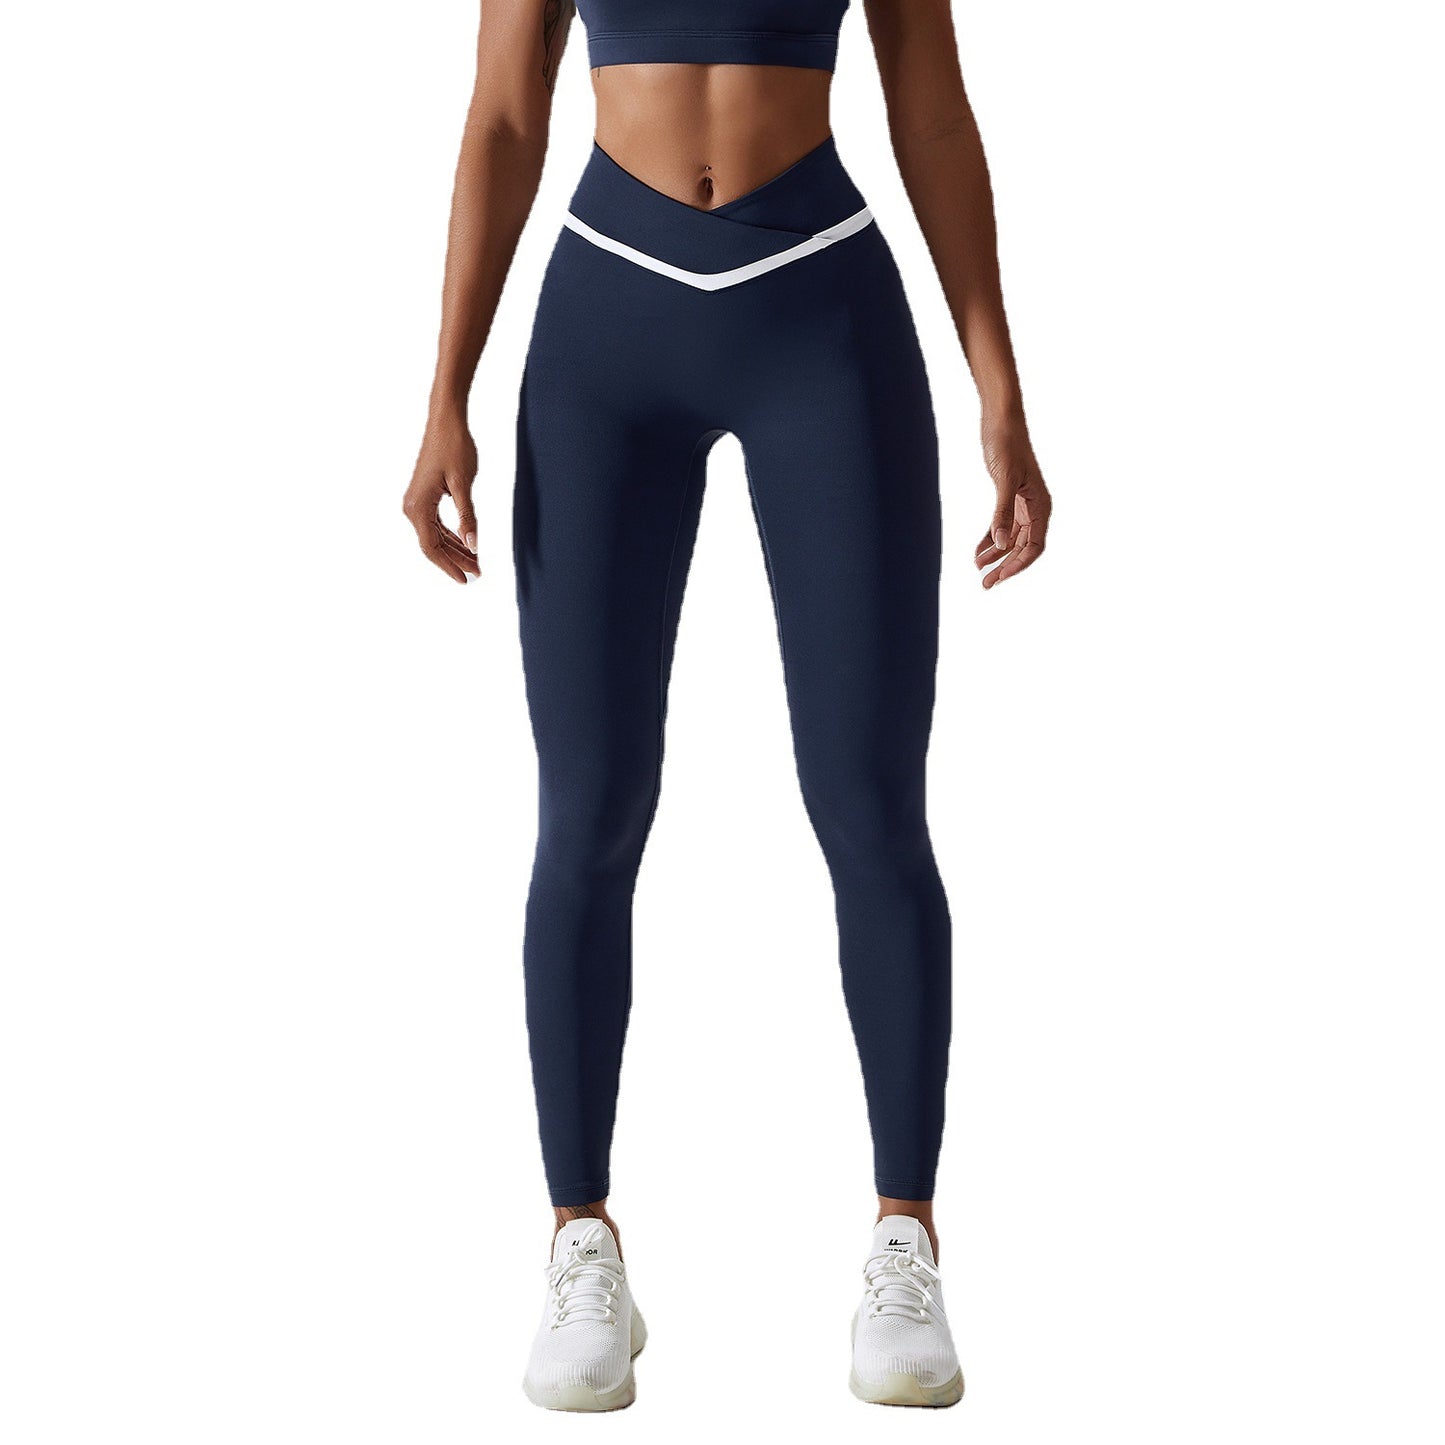 Women's High-Waisted Yoga Pants with Hip Lifting Design and Contrast Color - Quick-Drying and Tight Fit